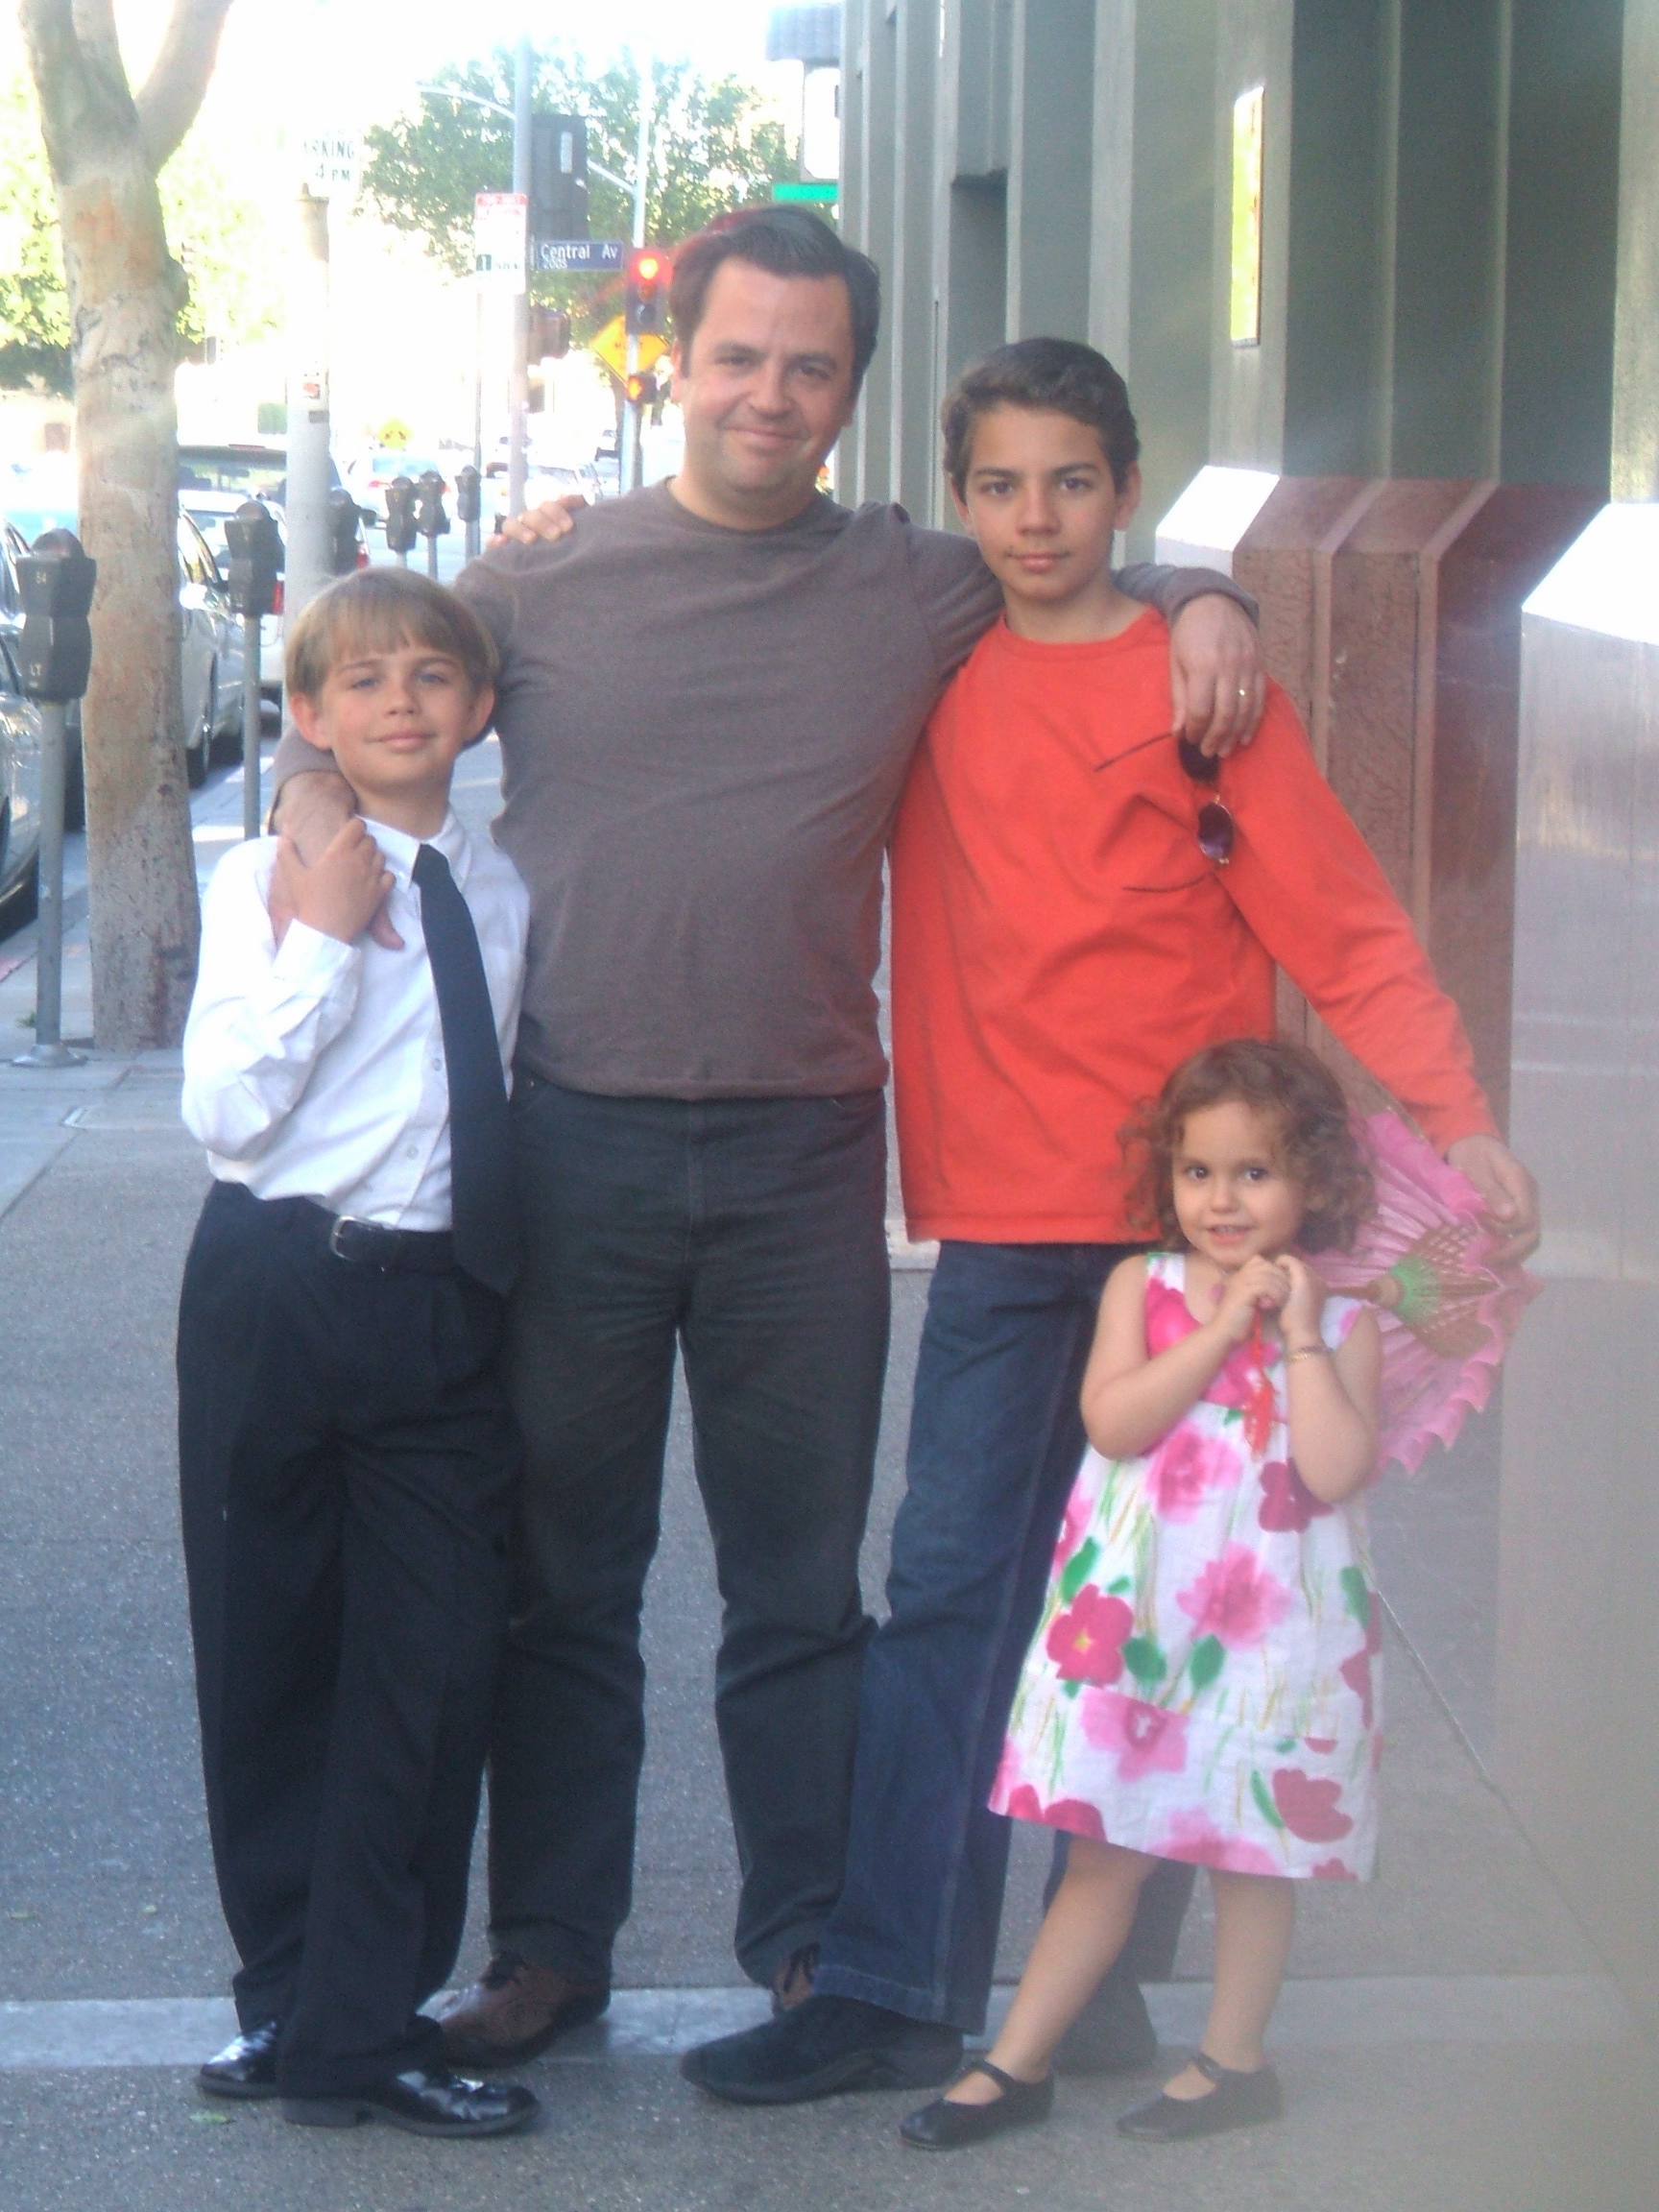 The Carrasco siblings with their dad (from left to right): Sebastian, Salvador, Juan-Salvador, and Cassandra.